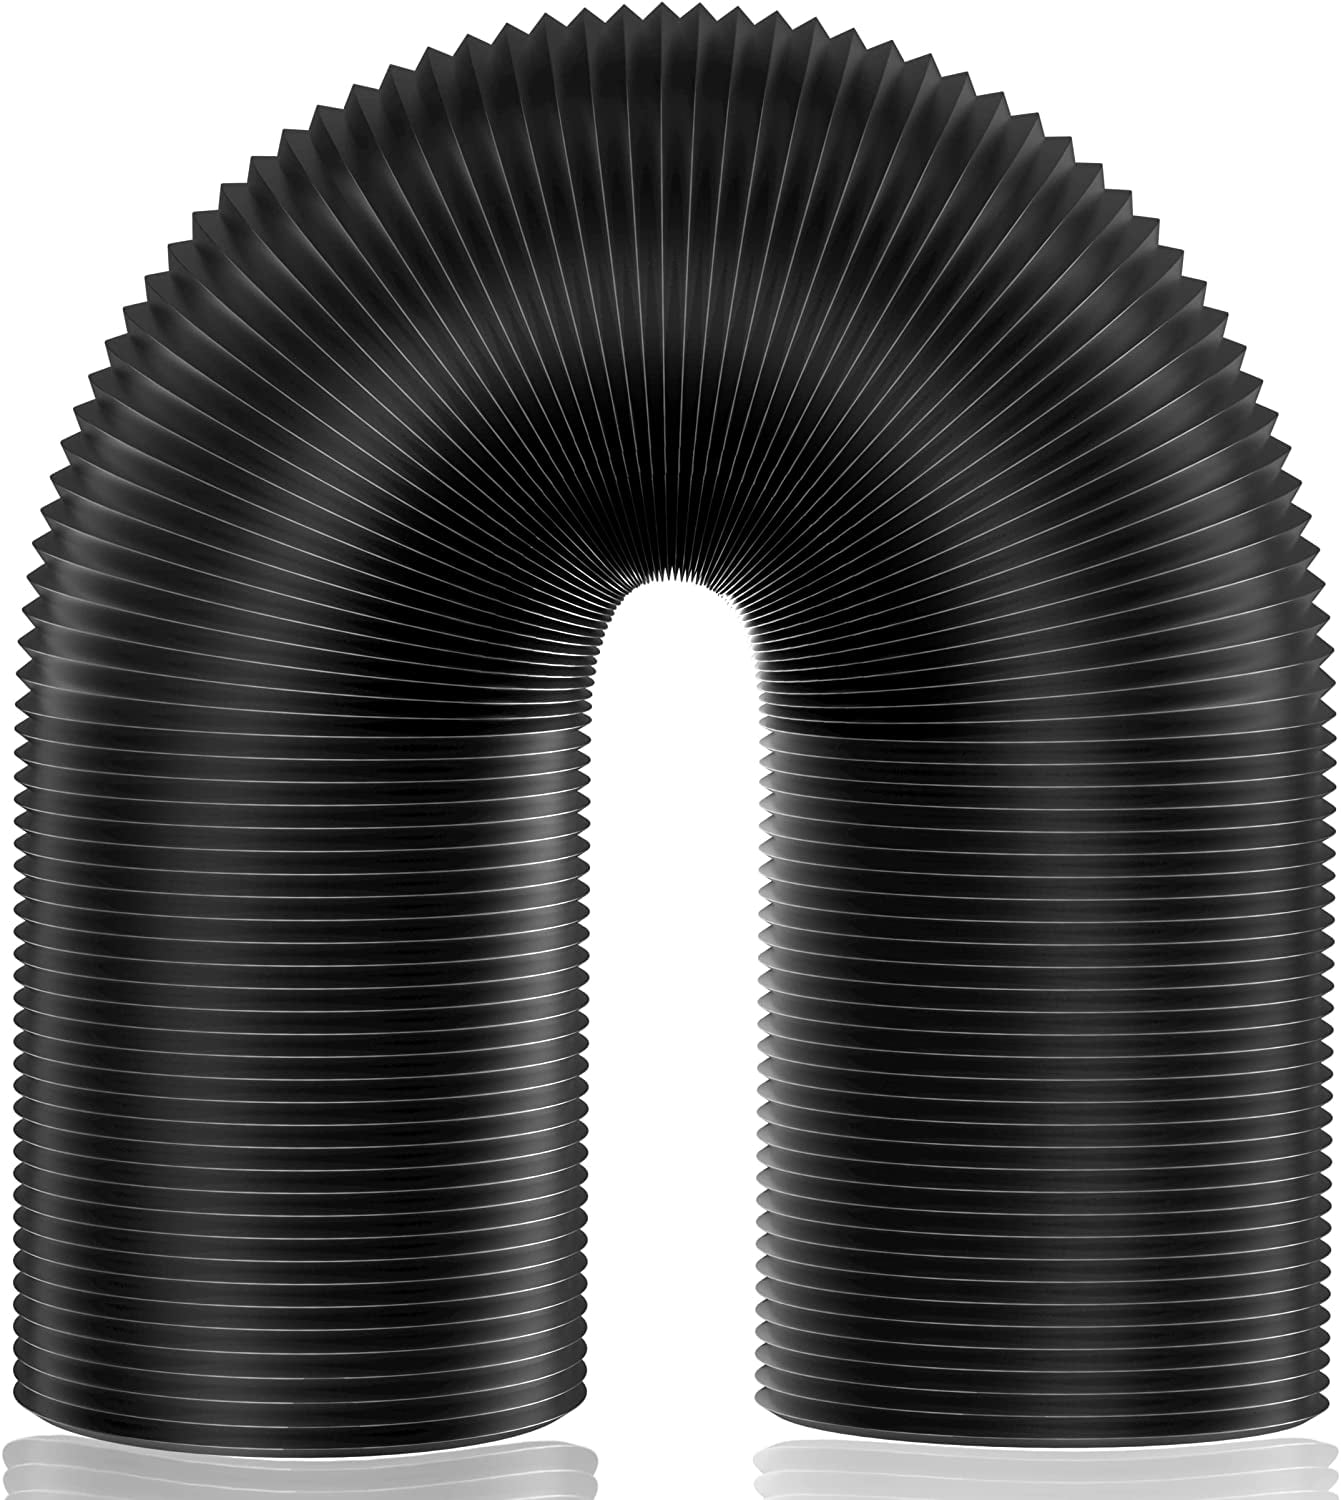 4" 5" 6" 16FT 32FT Silencer Noise Reducer Duct Hose Pipe Ventilation Air Duct 